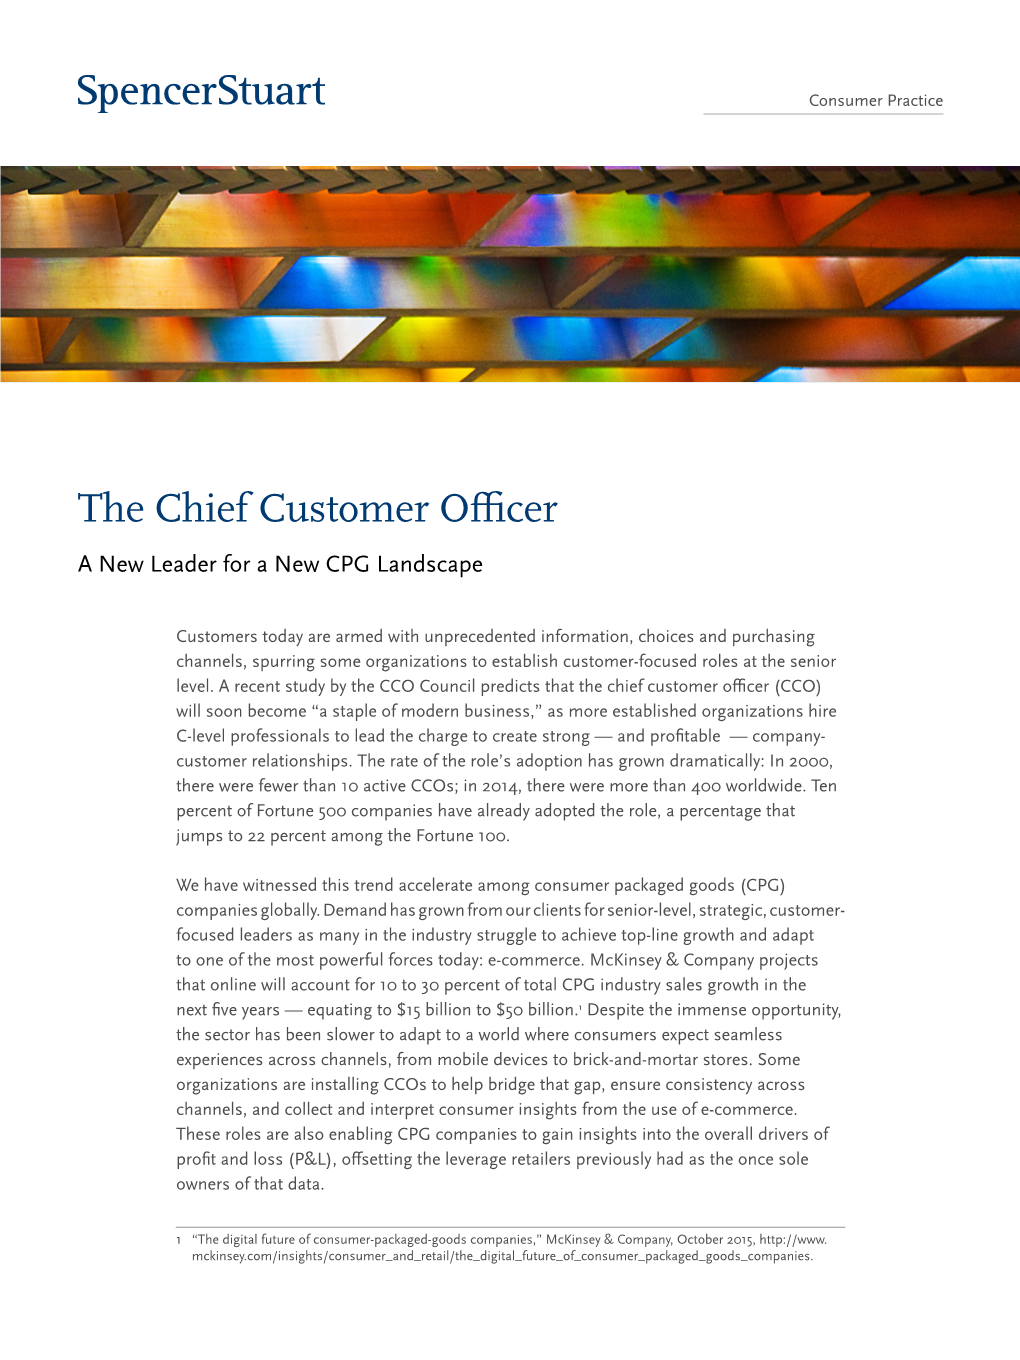 The Chief Customer Officer a New Leader for a New CPG Landscape